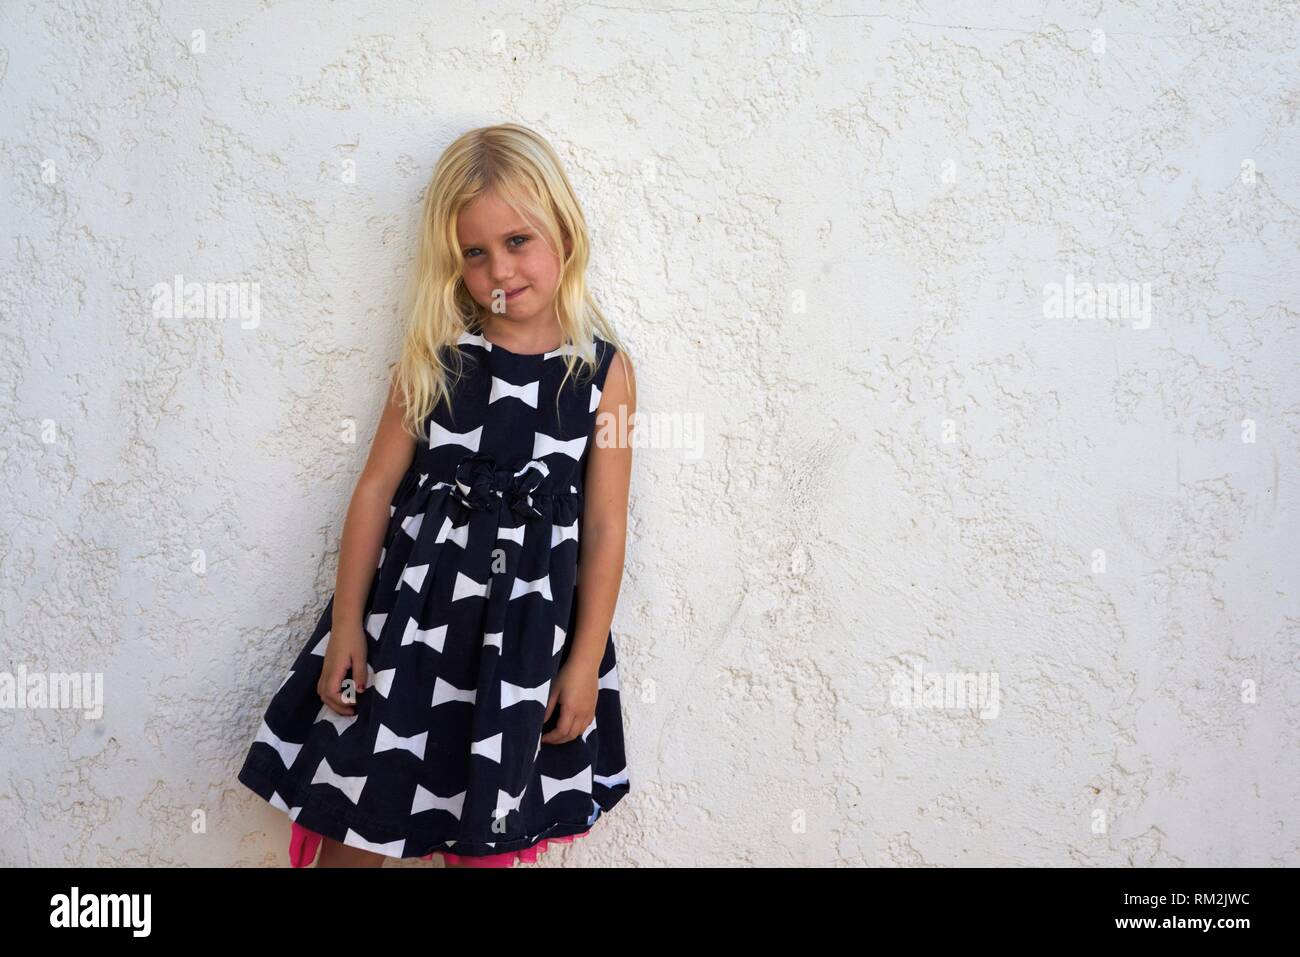 thoughtful female child in dress (metaphor for pressing children in societal norms and gendering) leaning against white wall. Australian ethnicity Stock Photo